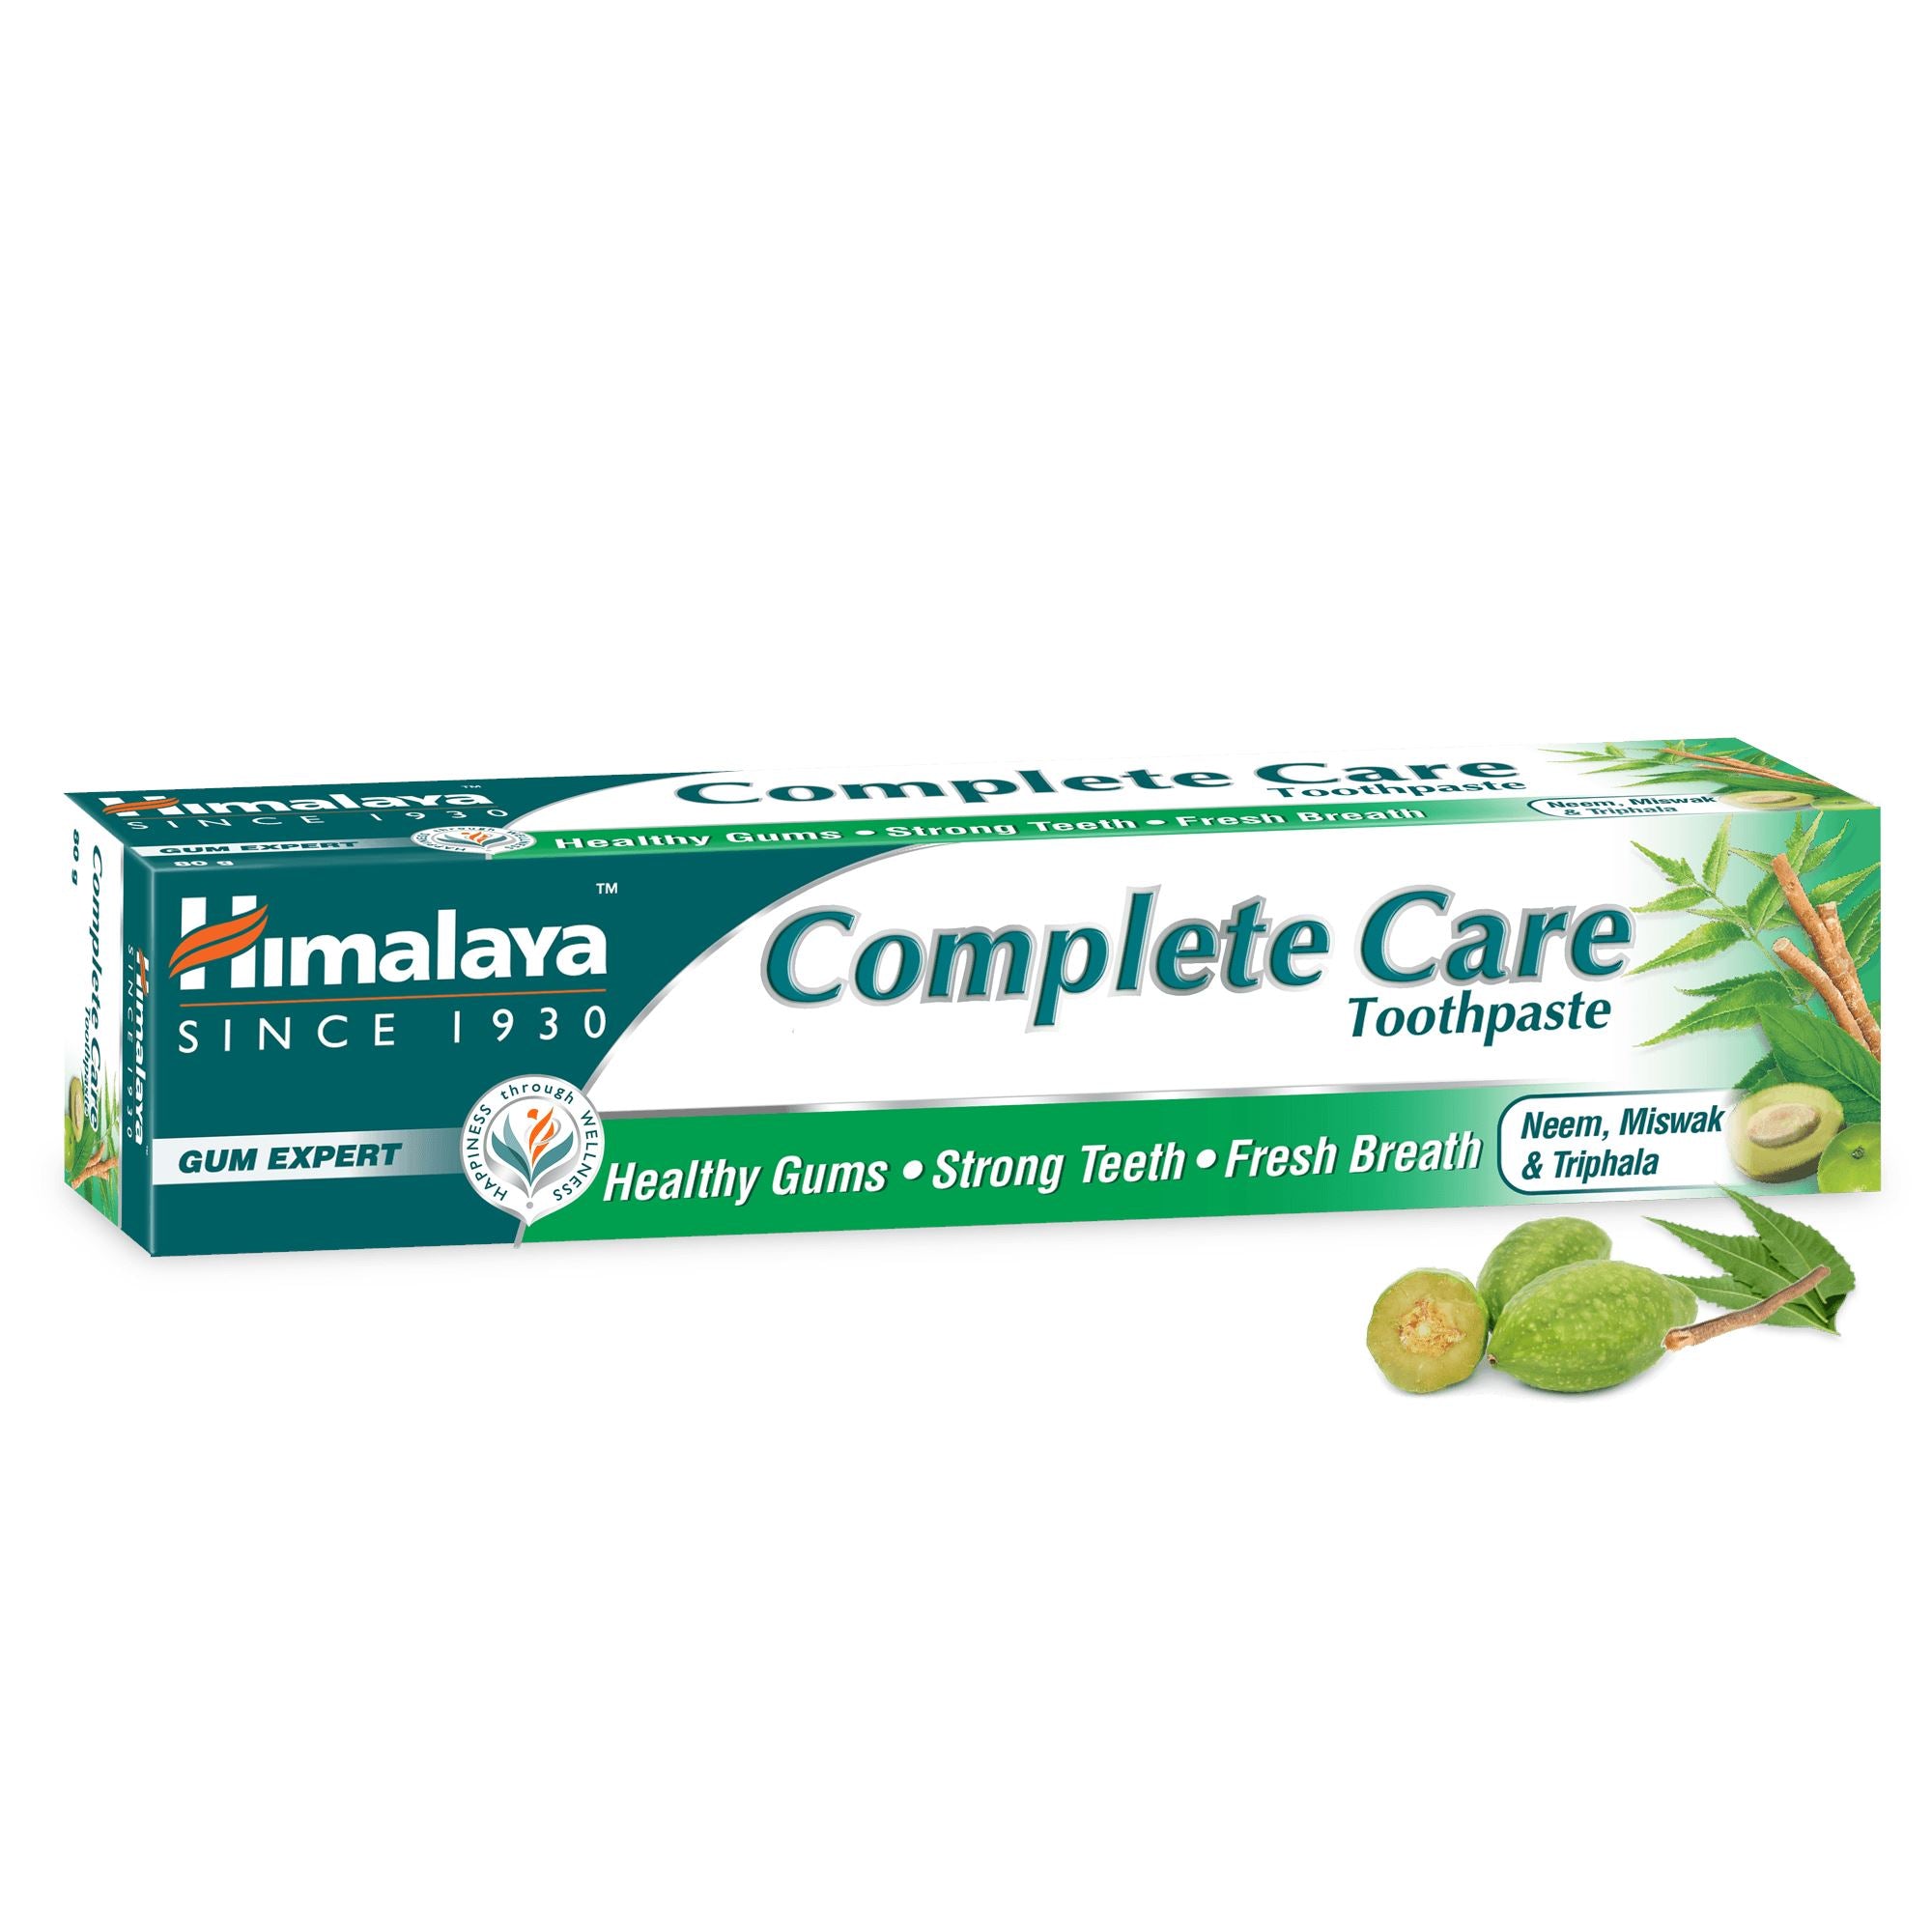 Himalaya Complete Care Toothpaste 80g - Healthy gums, Strong teeth, and Fresh breath